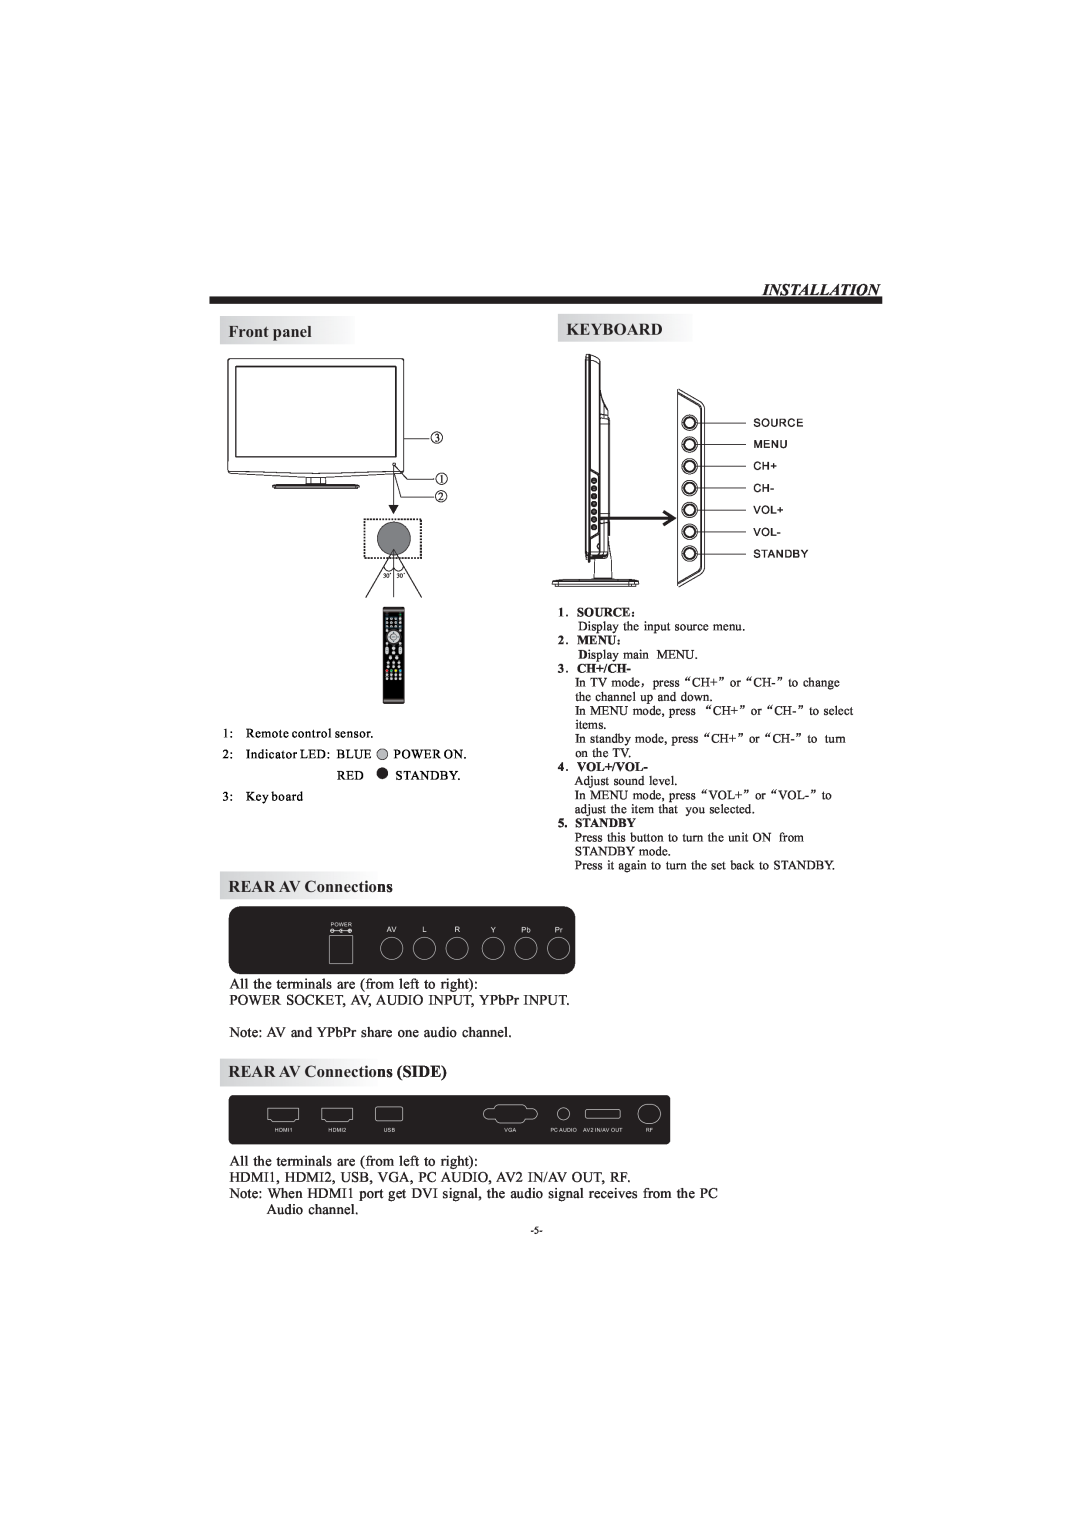 Haier LE22C430, LE24C430, LE19C430 owner manual Installation, Front panel, Keyboard, REAR AV Connections SIDE 